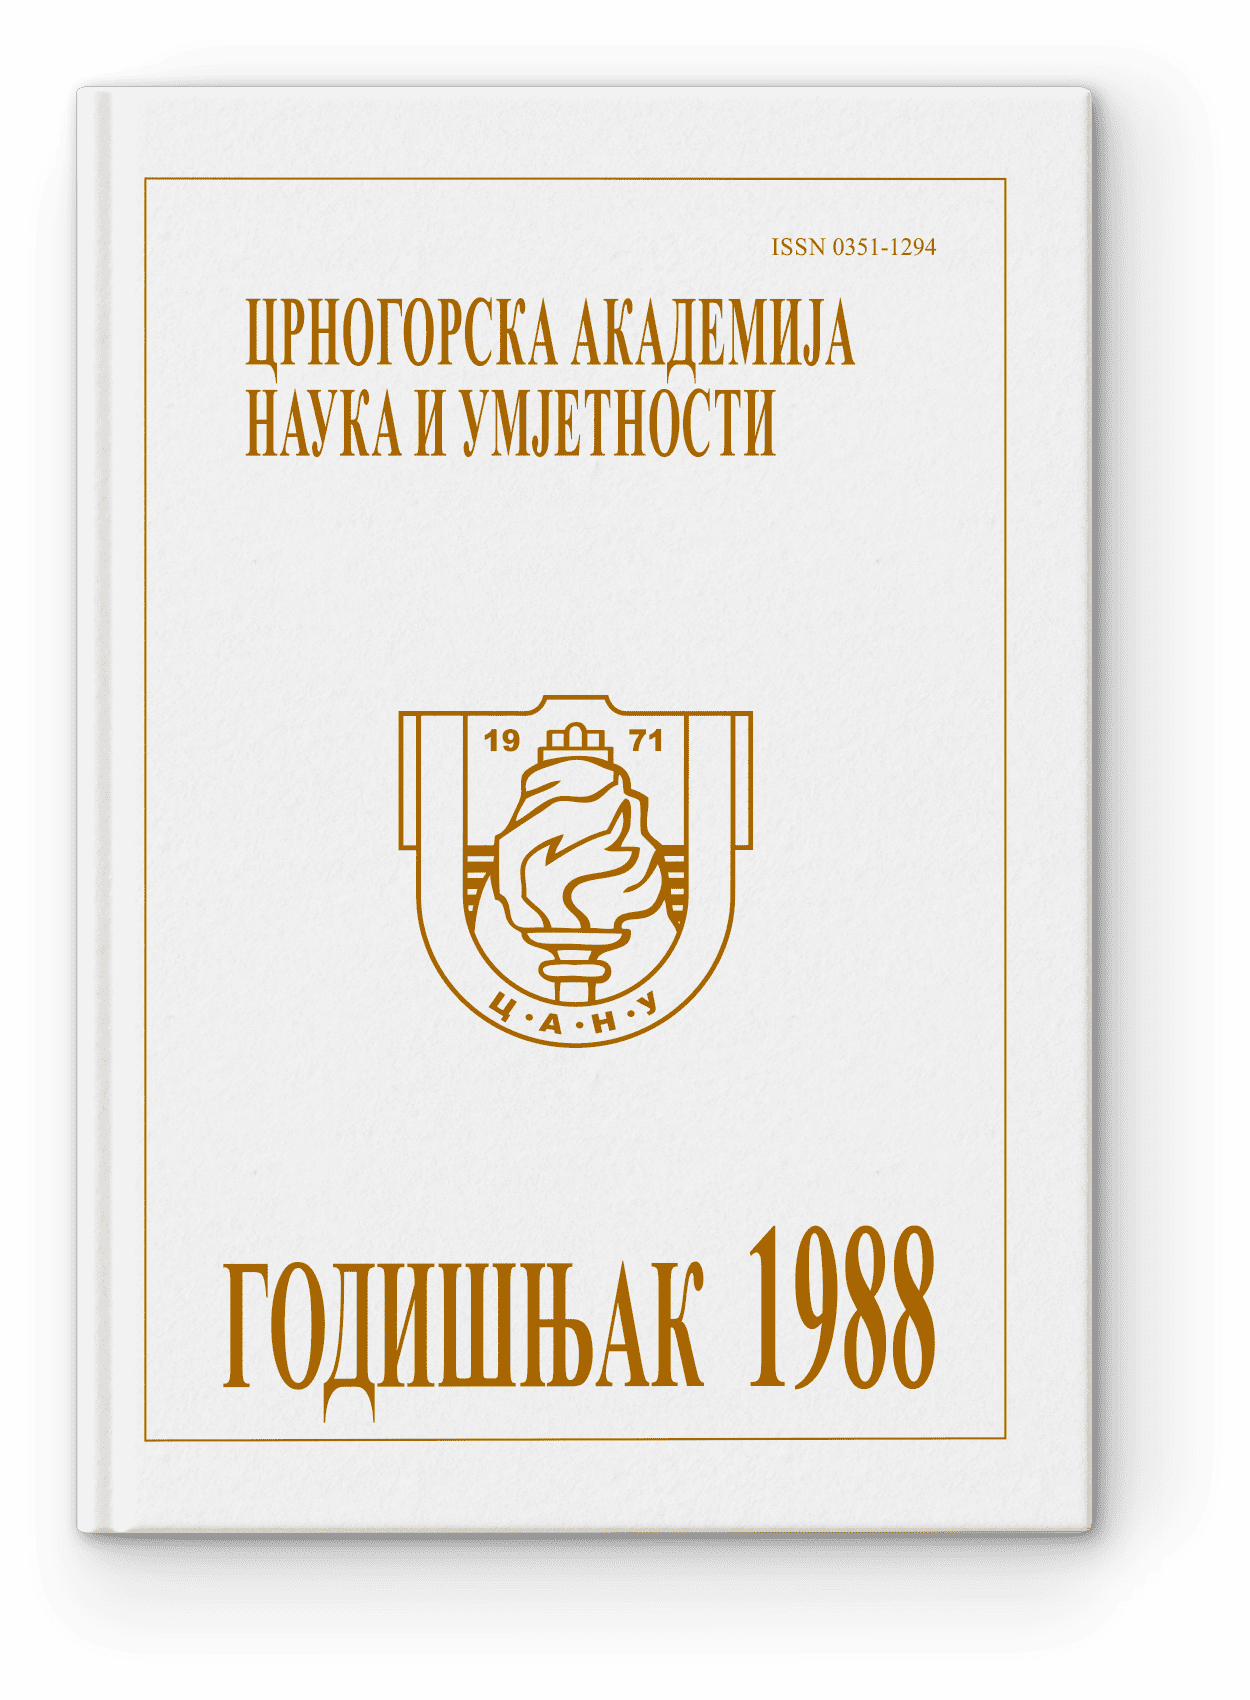 Yearbook 1988